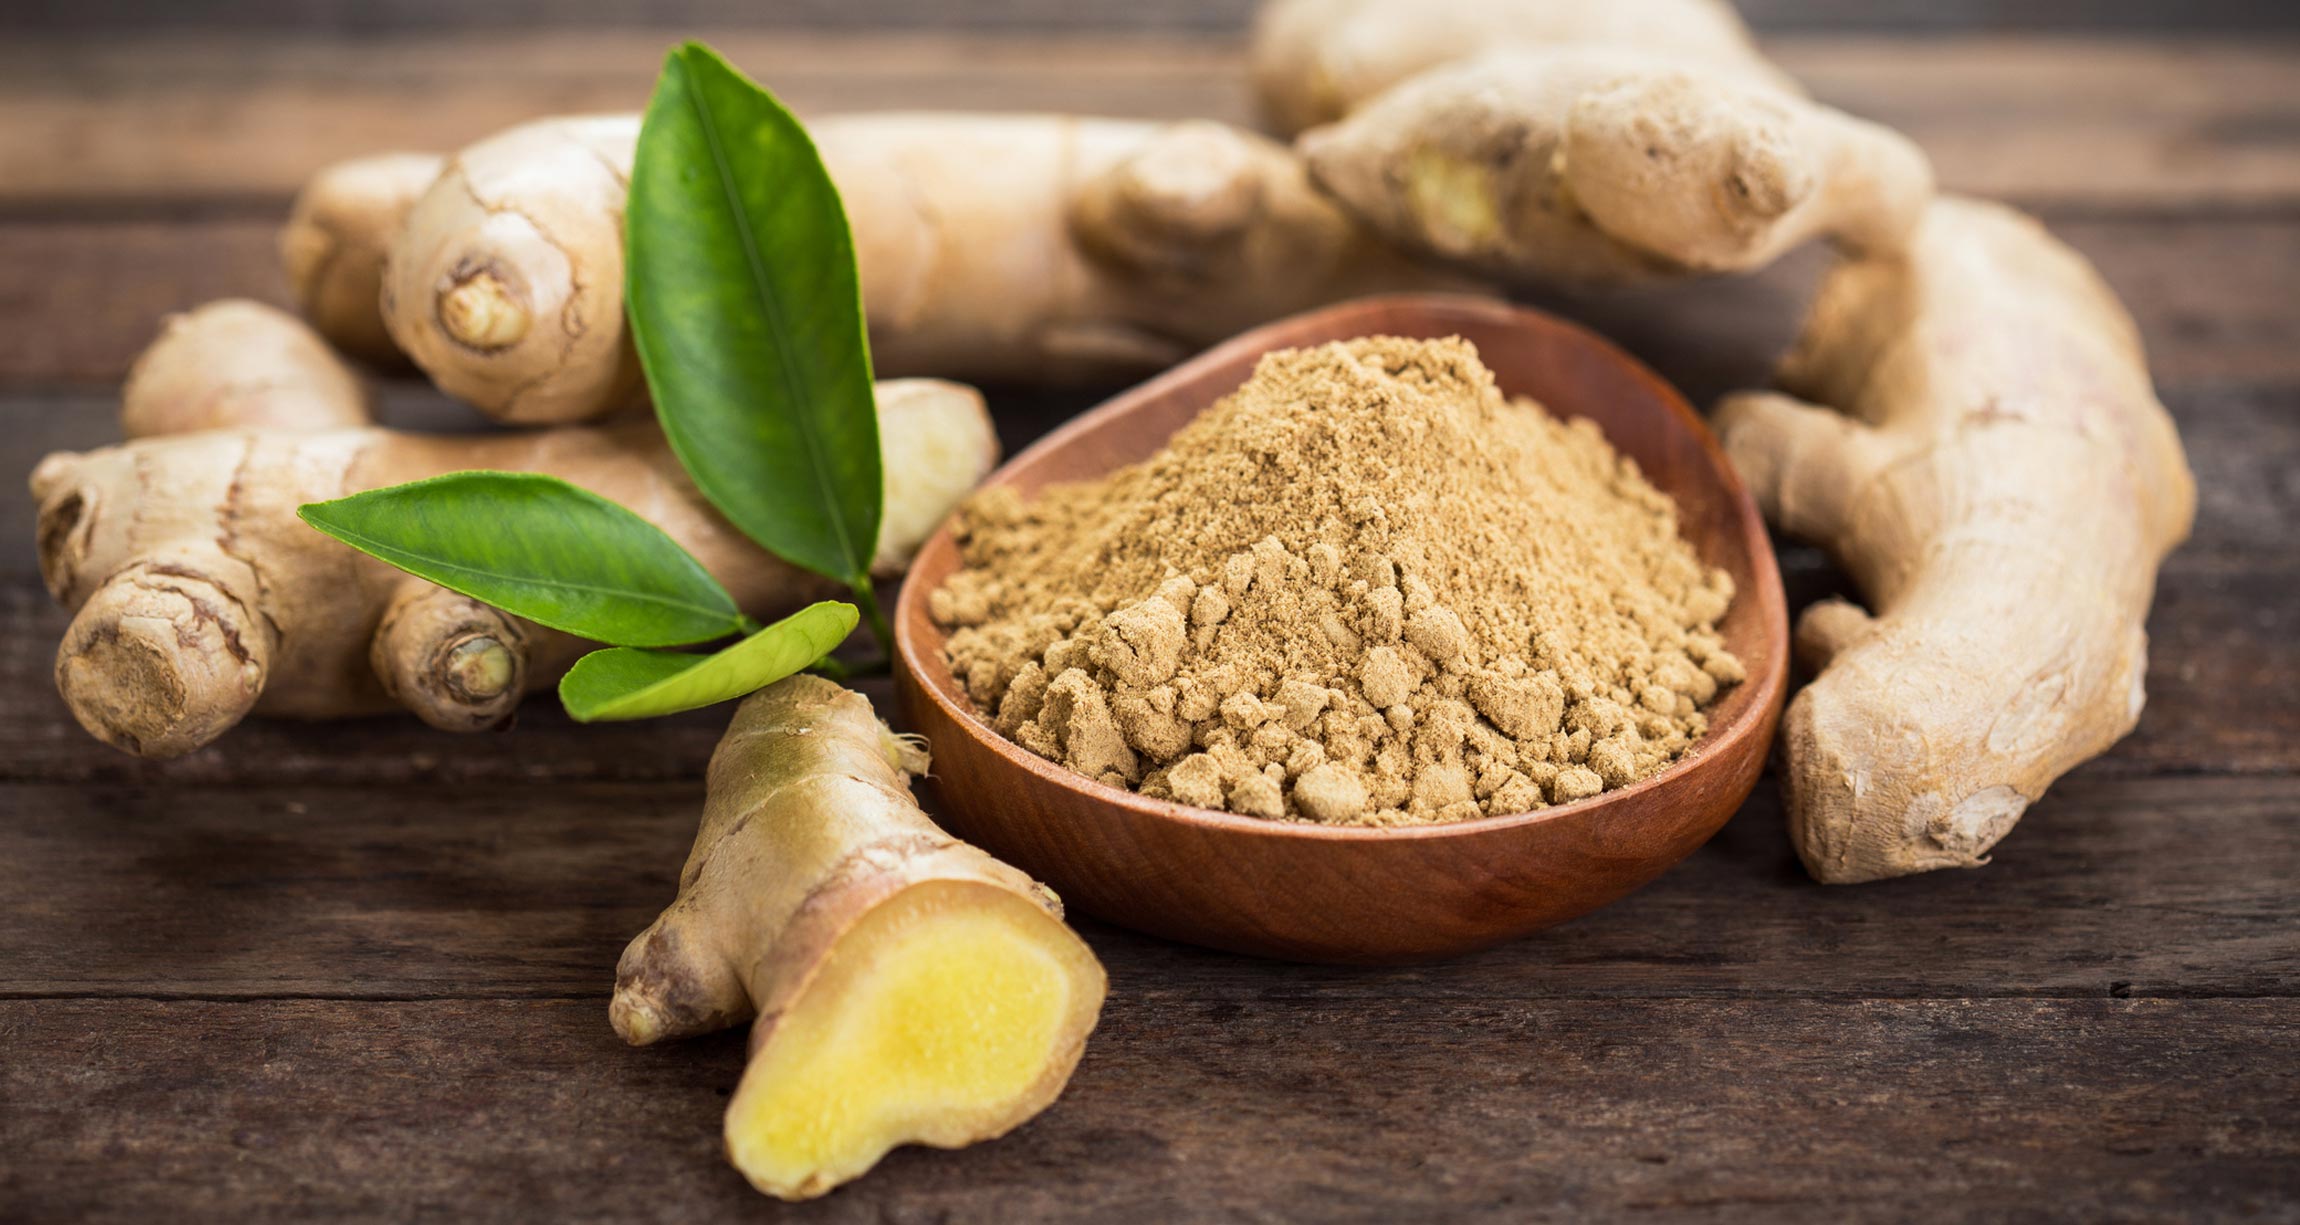 ginger and cancer: 10,000x more powerful than chemotherapy